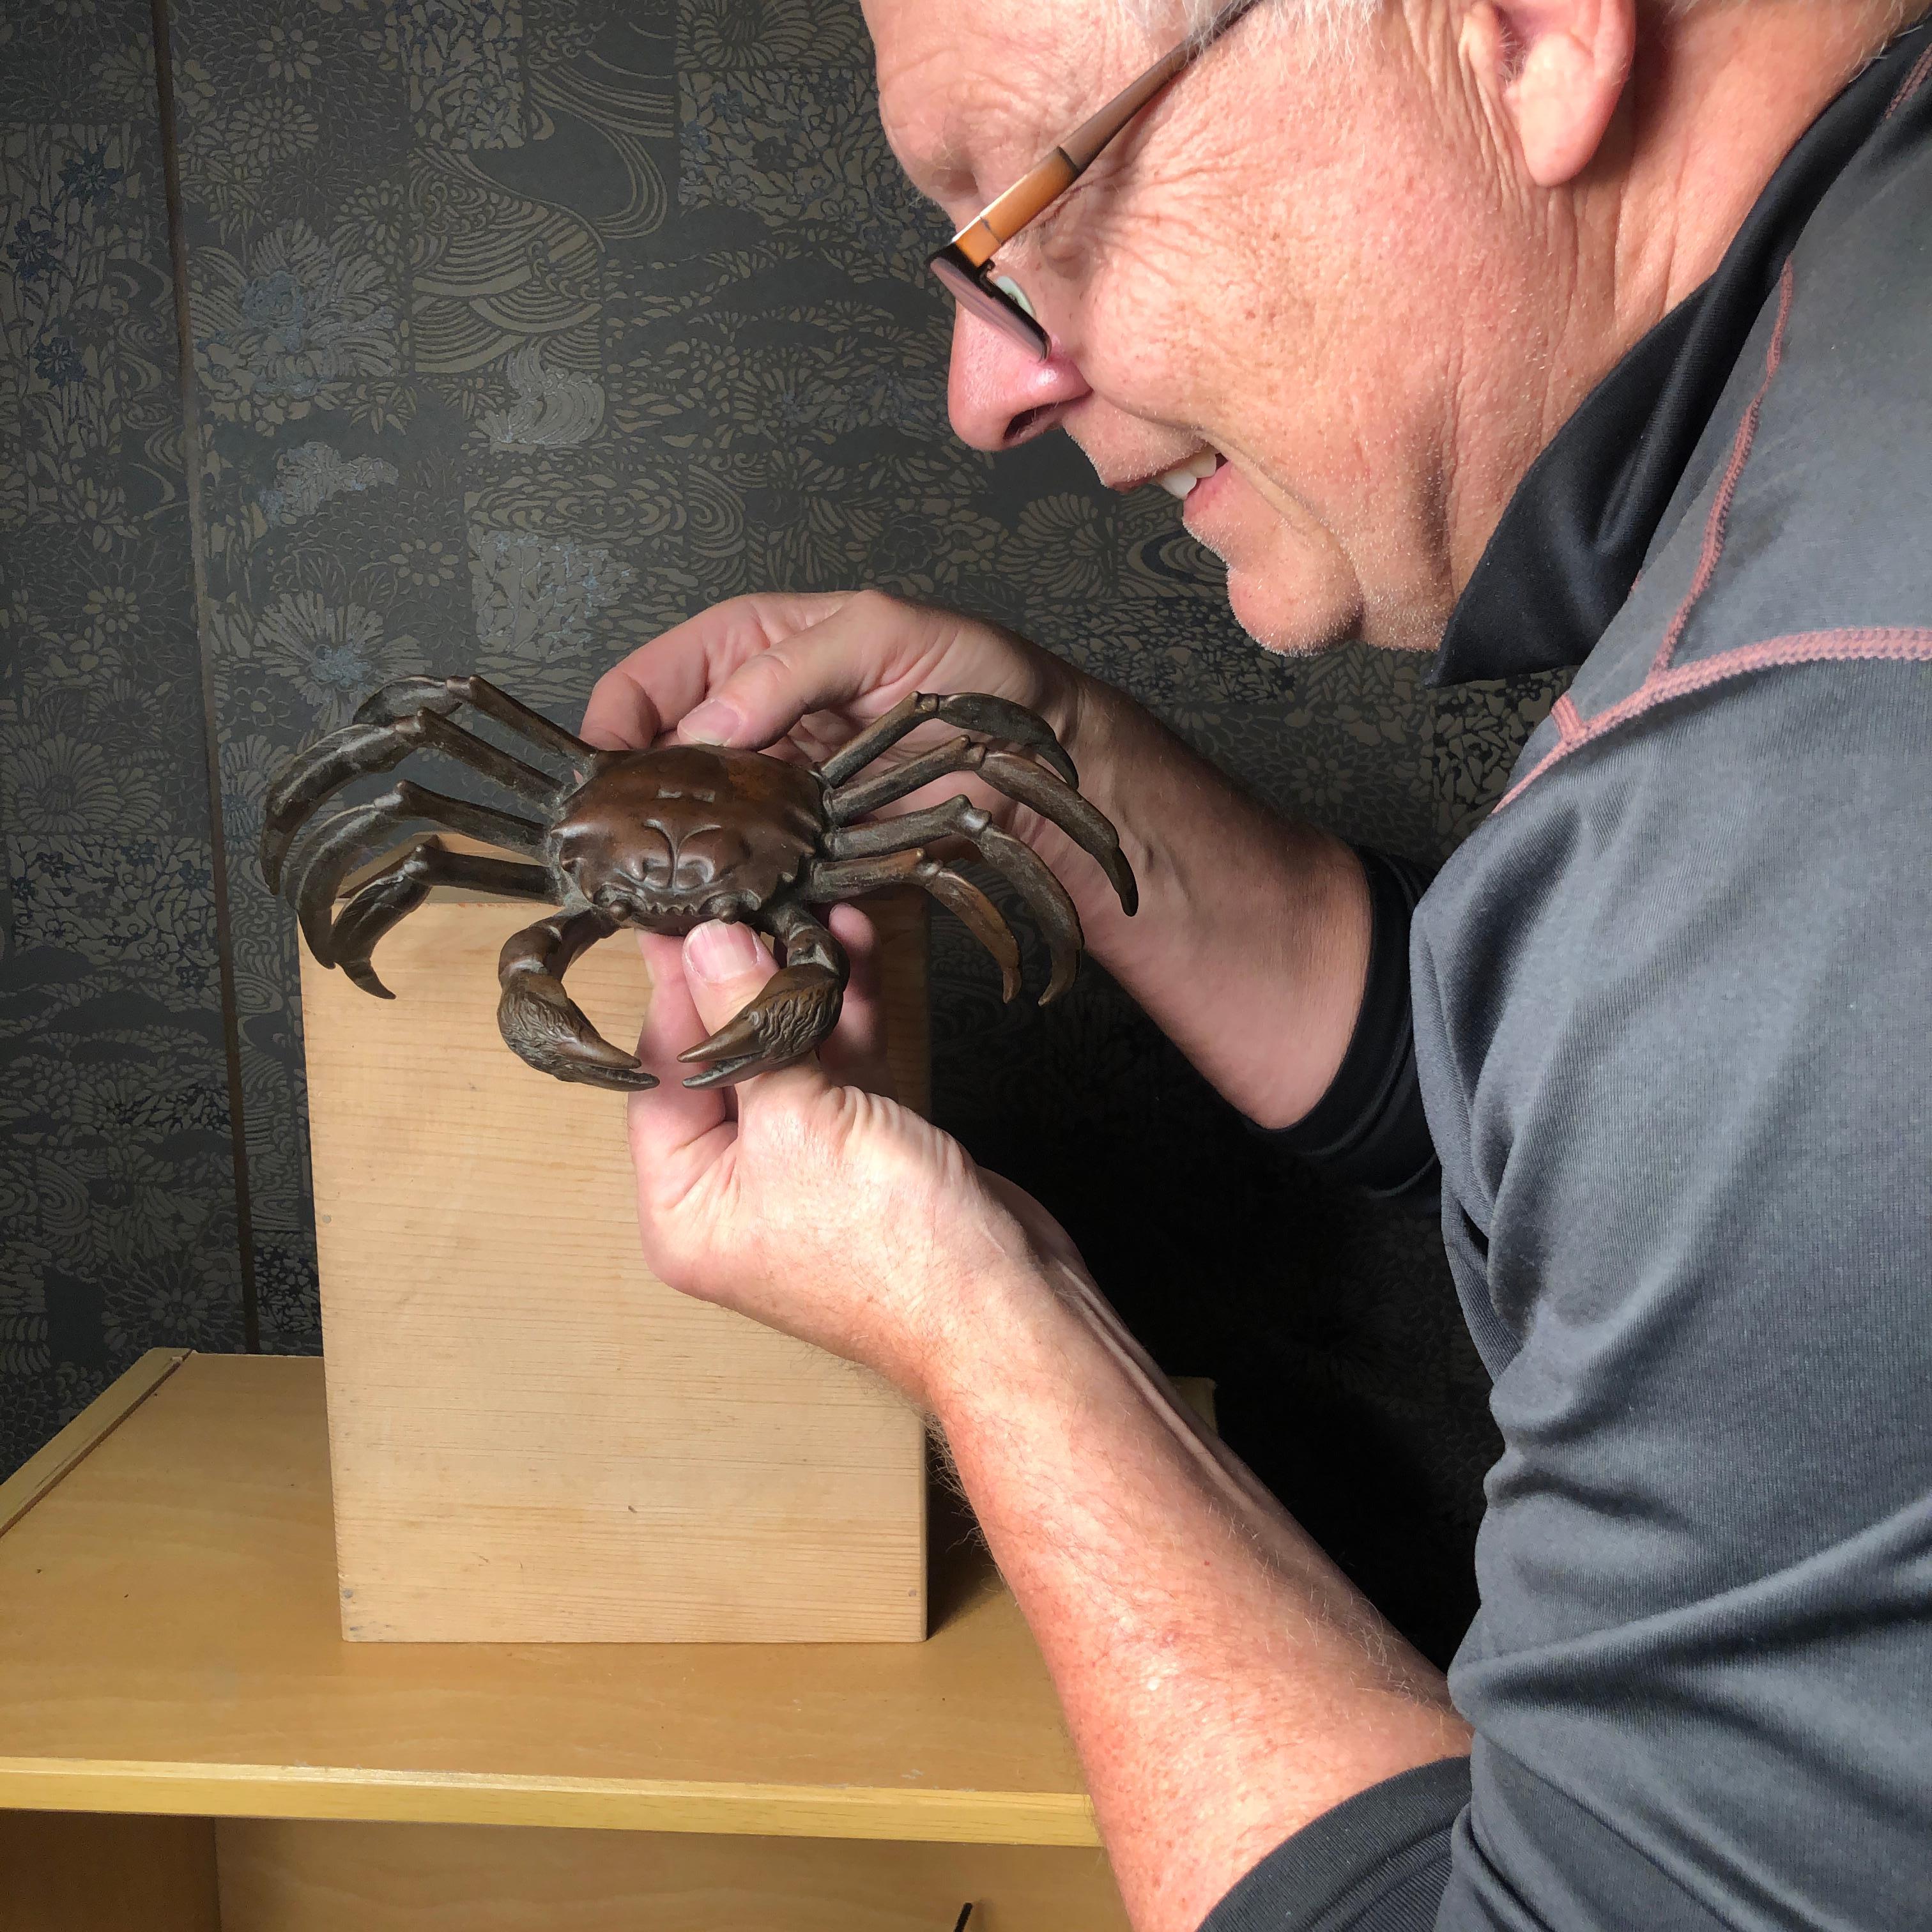 From our recent Japanese Kyoto New Acquistions Travels

A fine genuinely antique Japanese hand wrought and hand cast copper eight-legged crab Okimono sculpture from an old Kyoto collection. Very fine condition. Today these older works of art serve